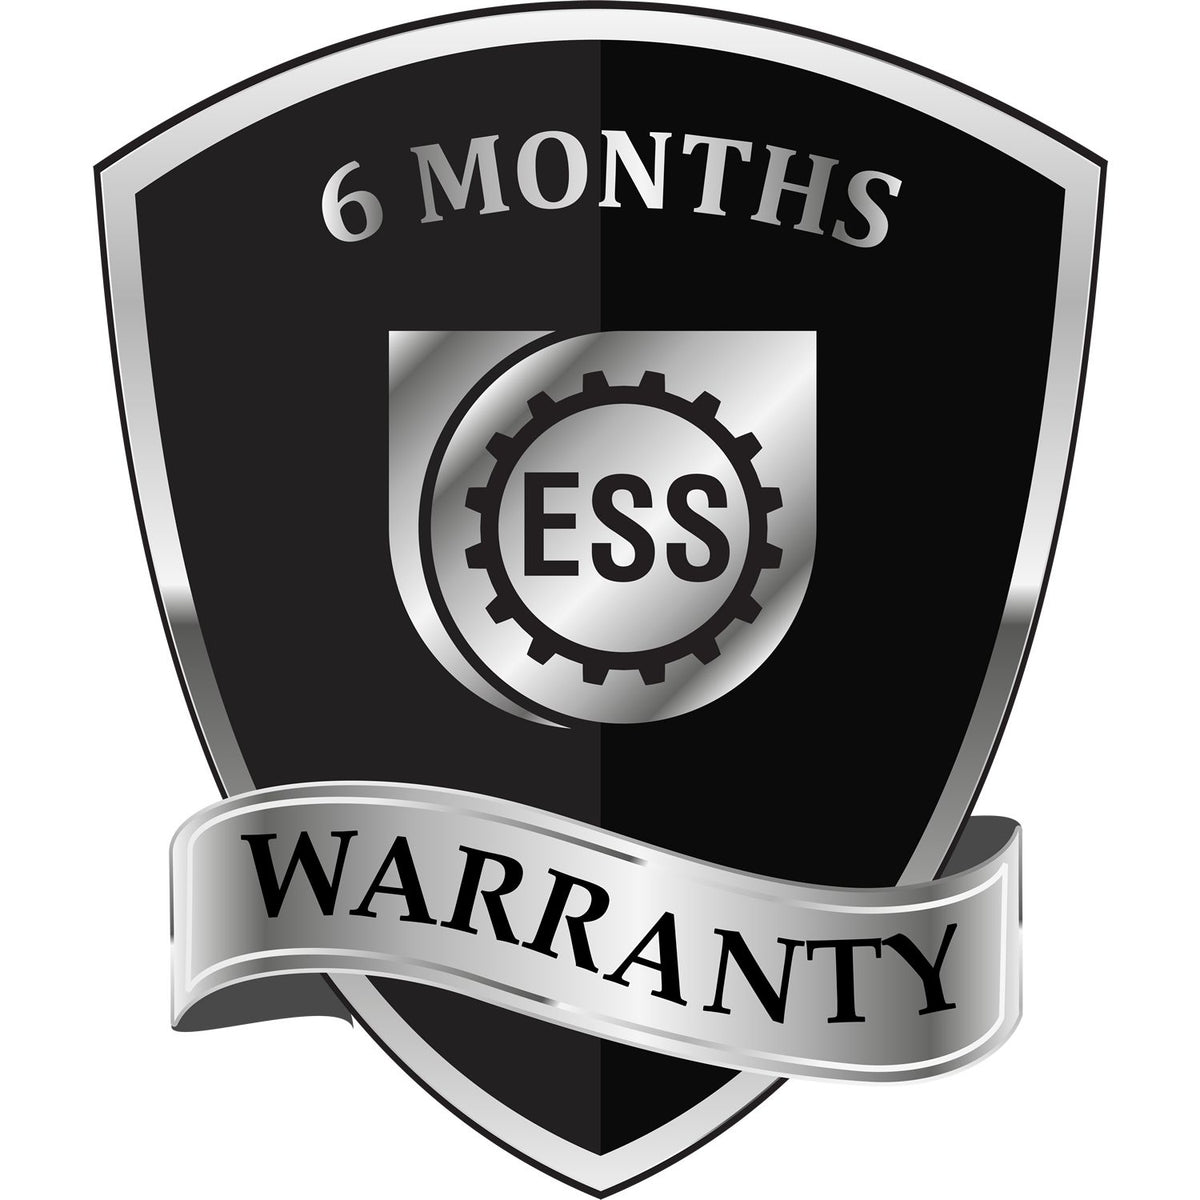 A badge or emblem showing a warranty icon for the Self-Inking Rectangular Washington Notary Stamp